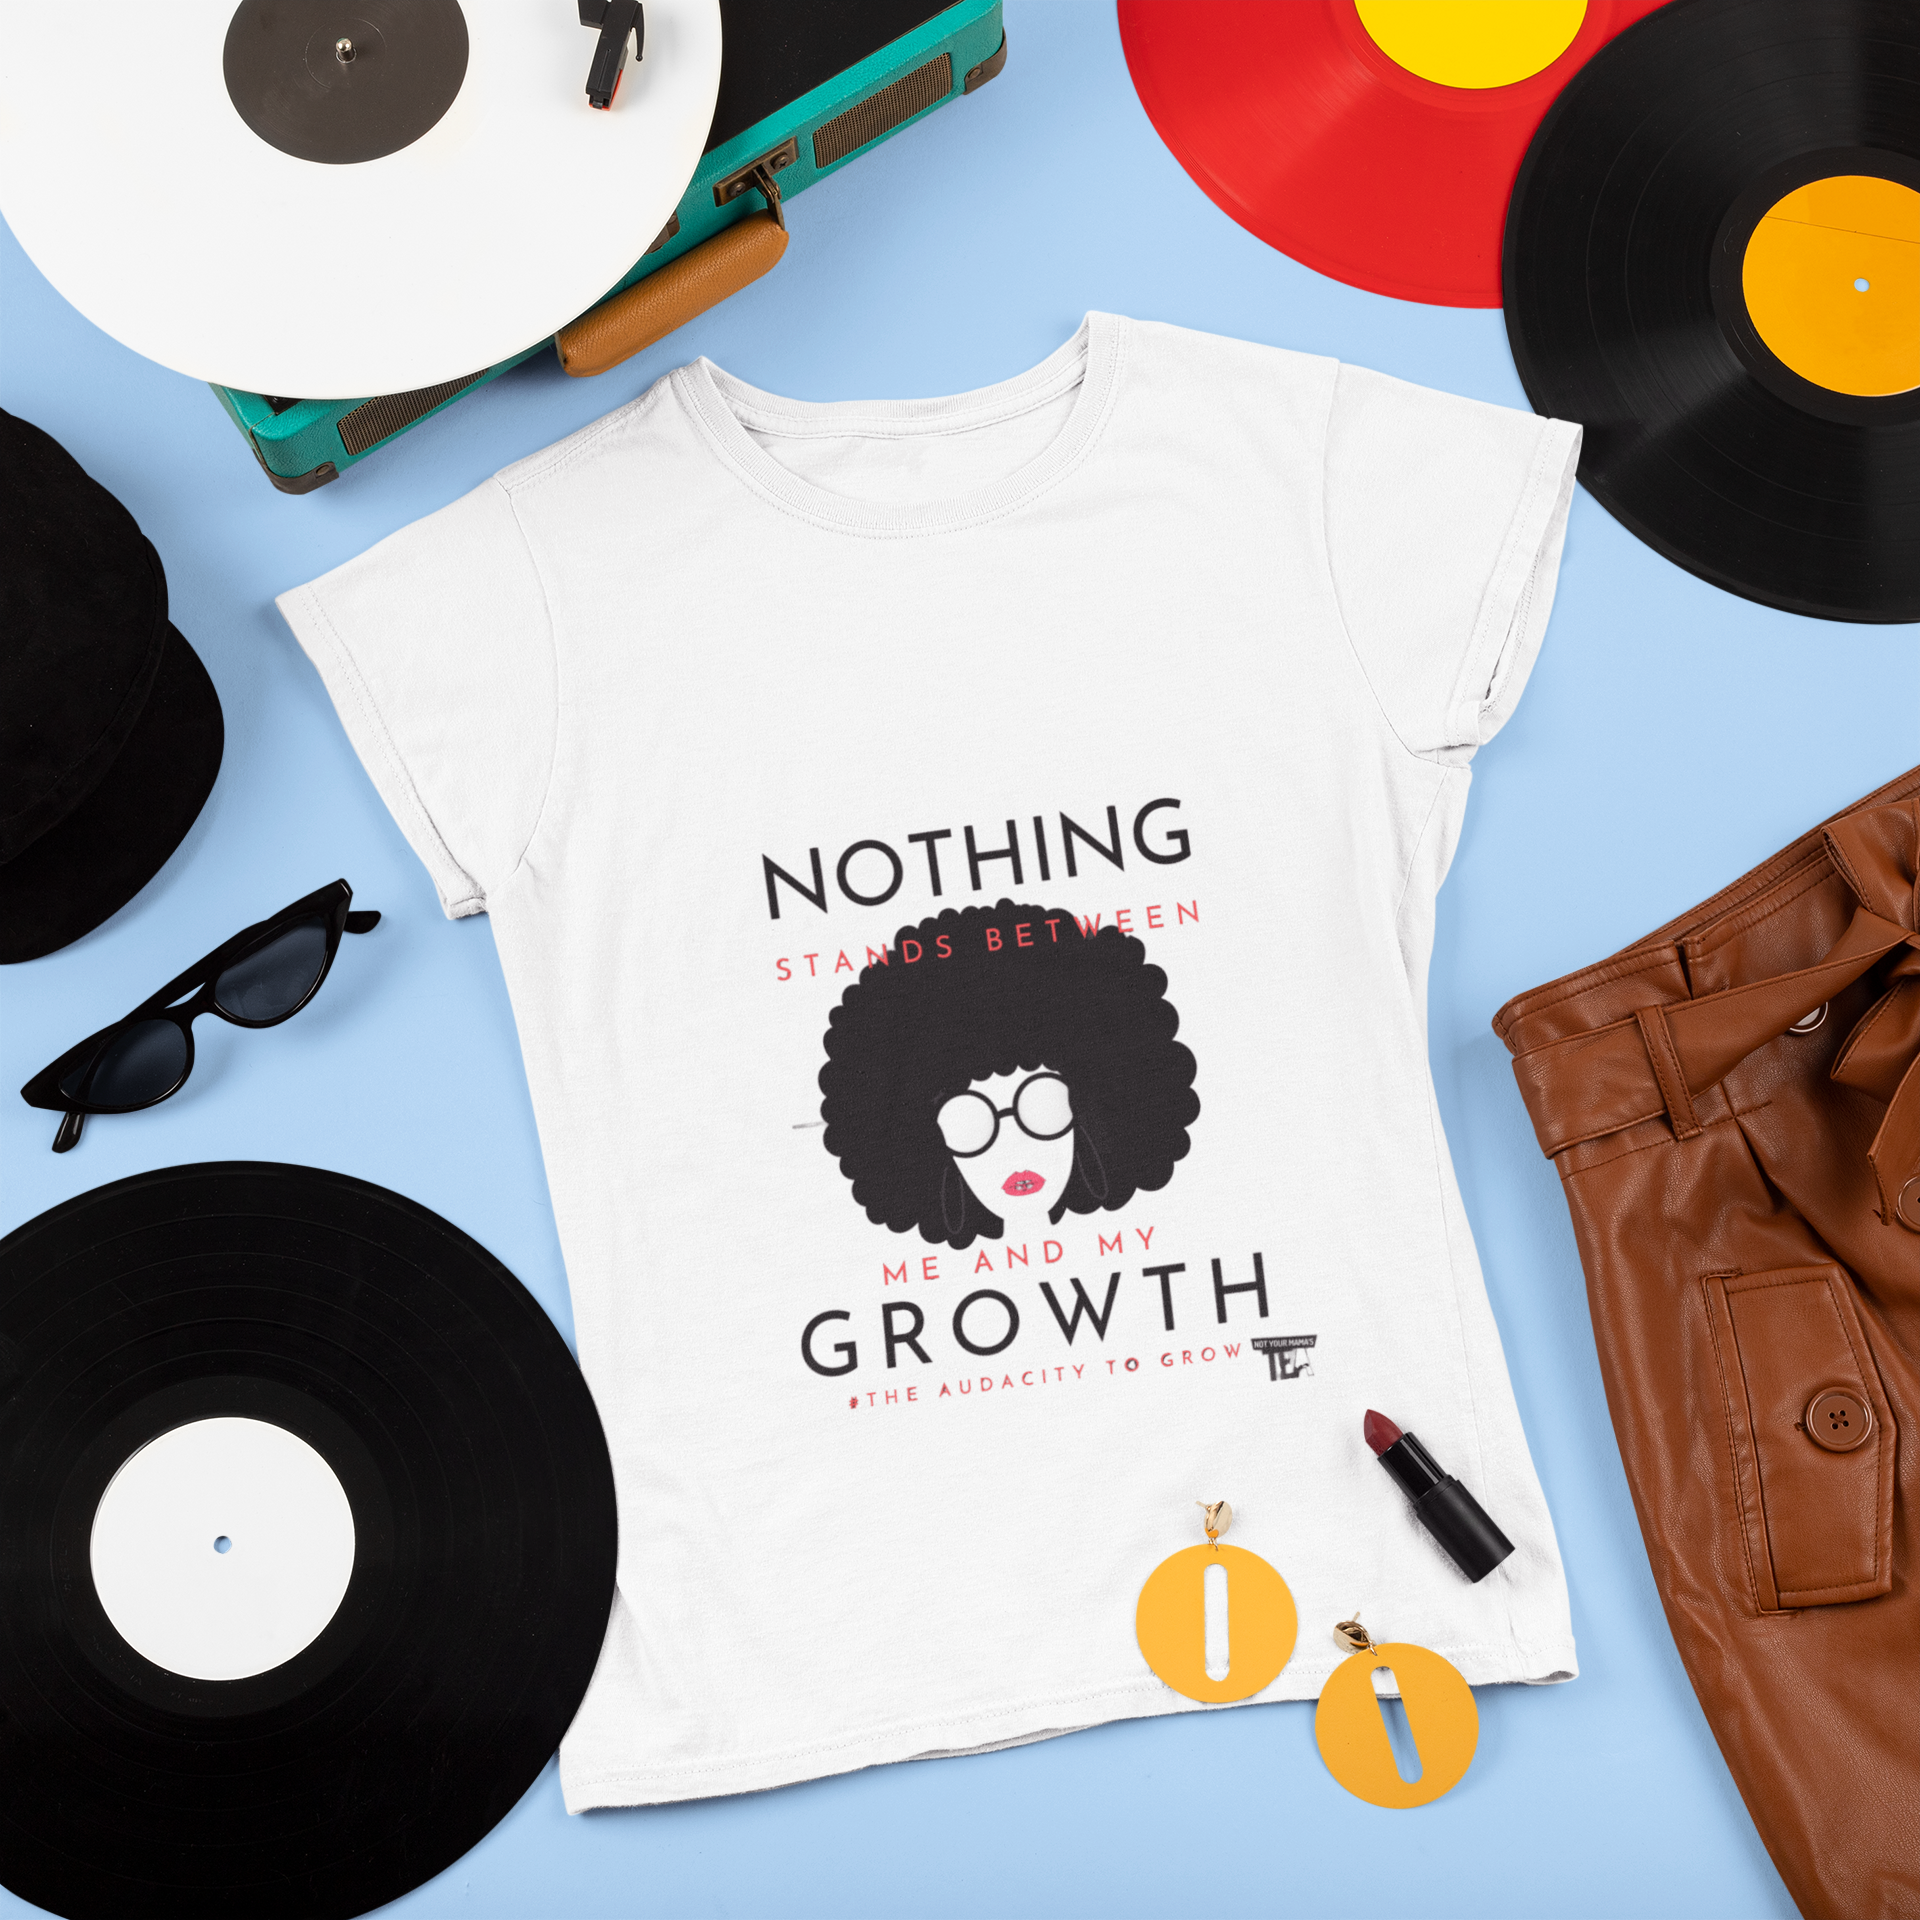 t-shirt-mockup-featuring-a-music-enthusiast-s-outfit-43297